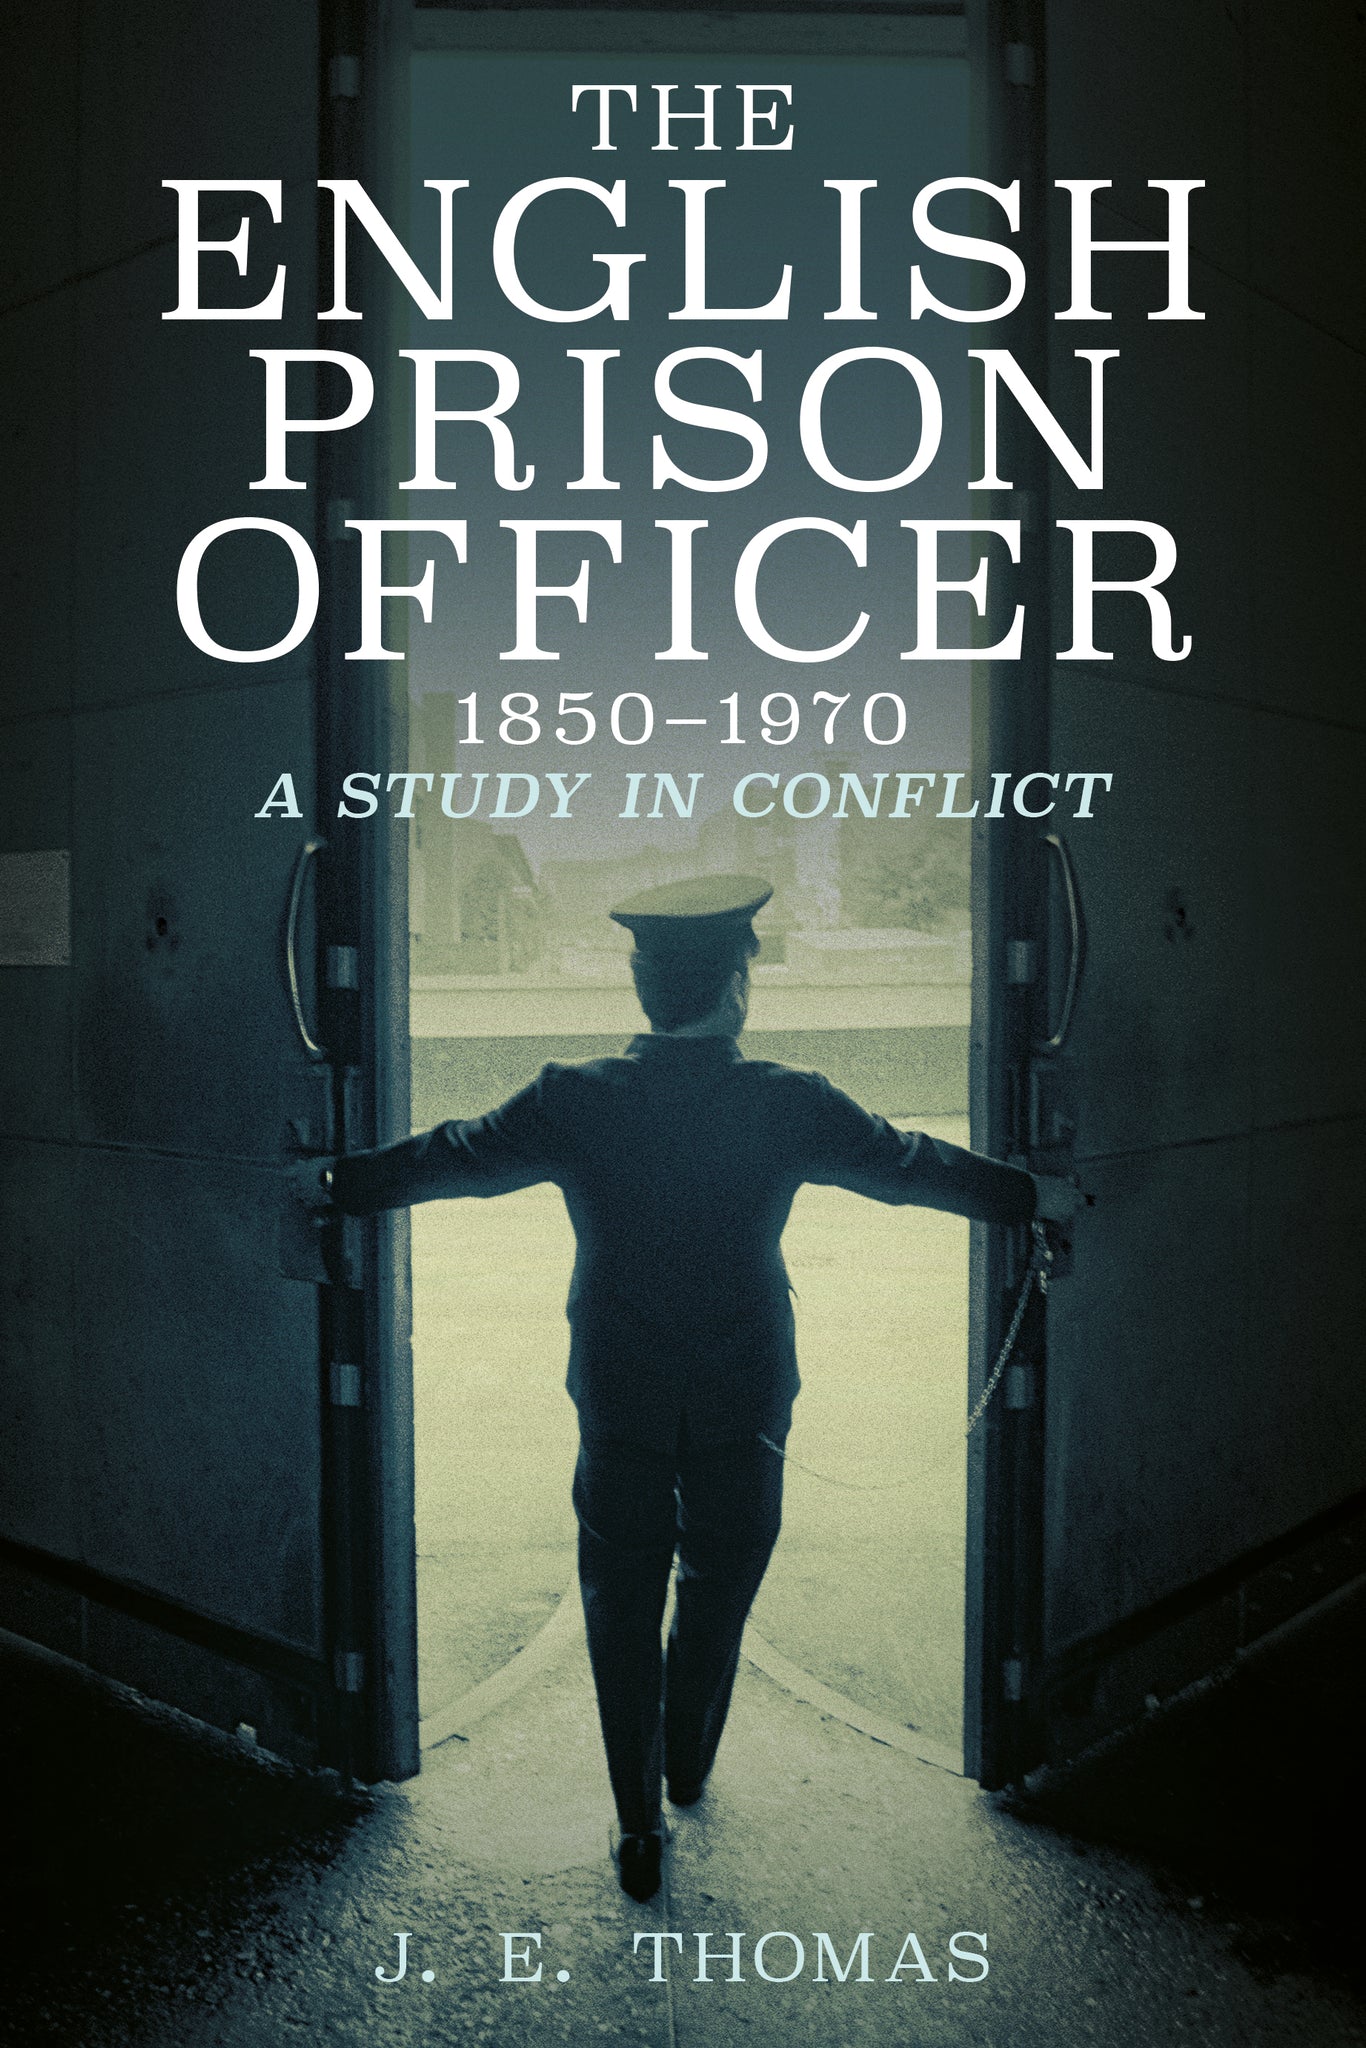 The English Prison Officer 1850-1970 – A Study in Conflict